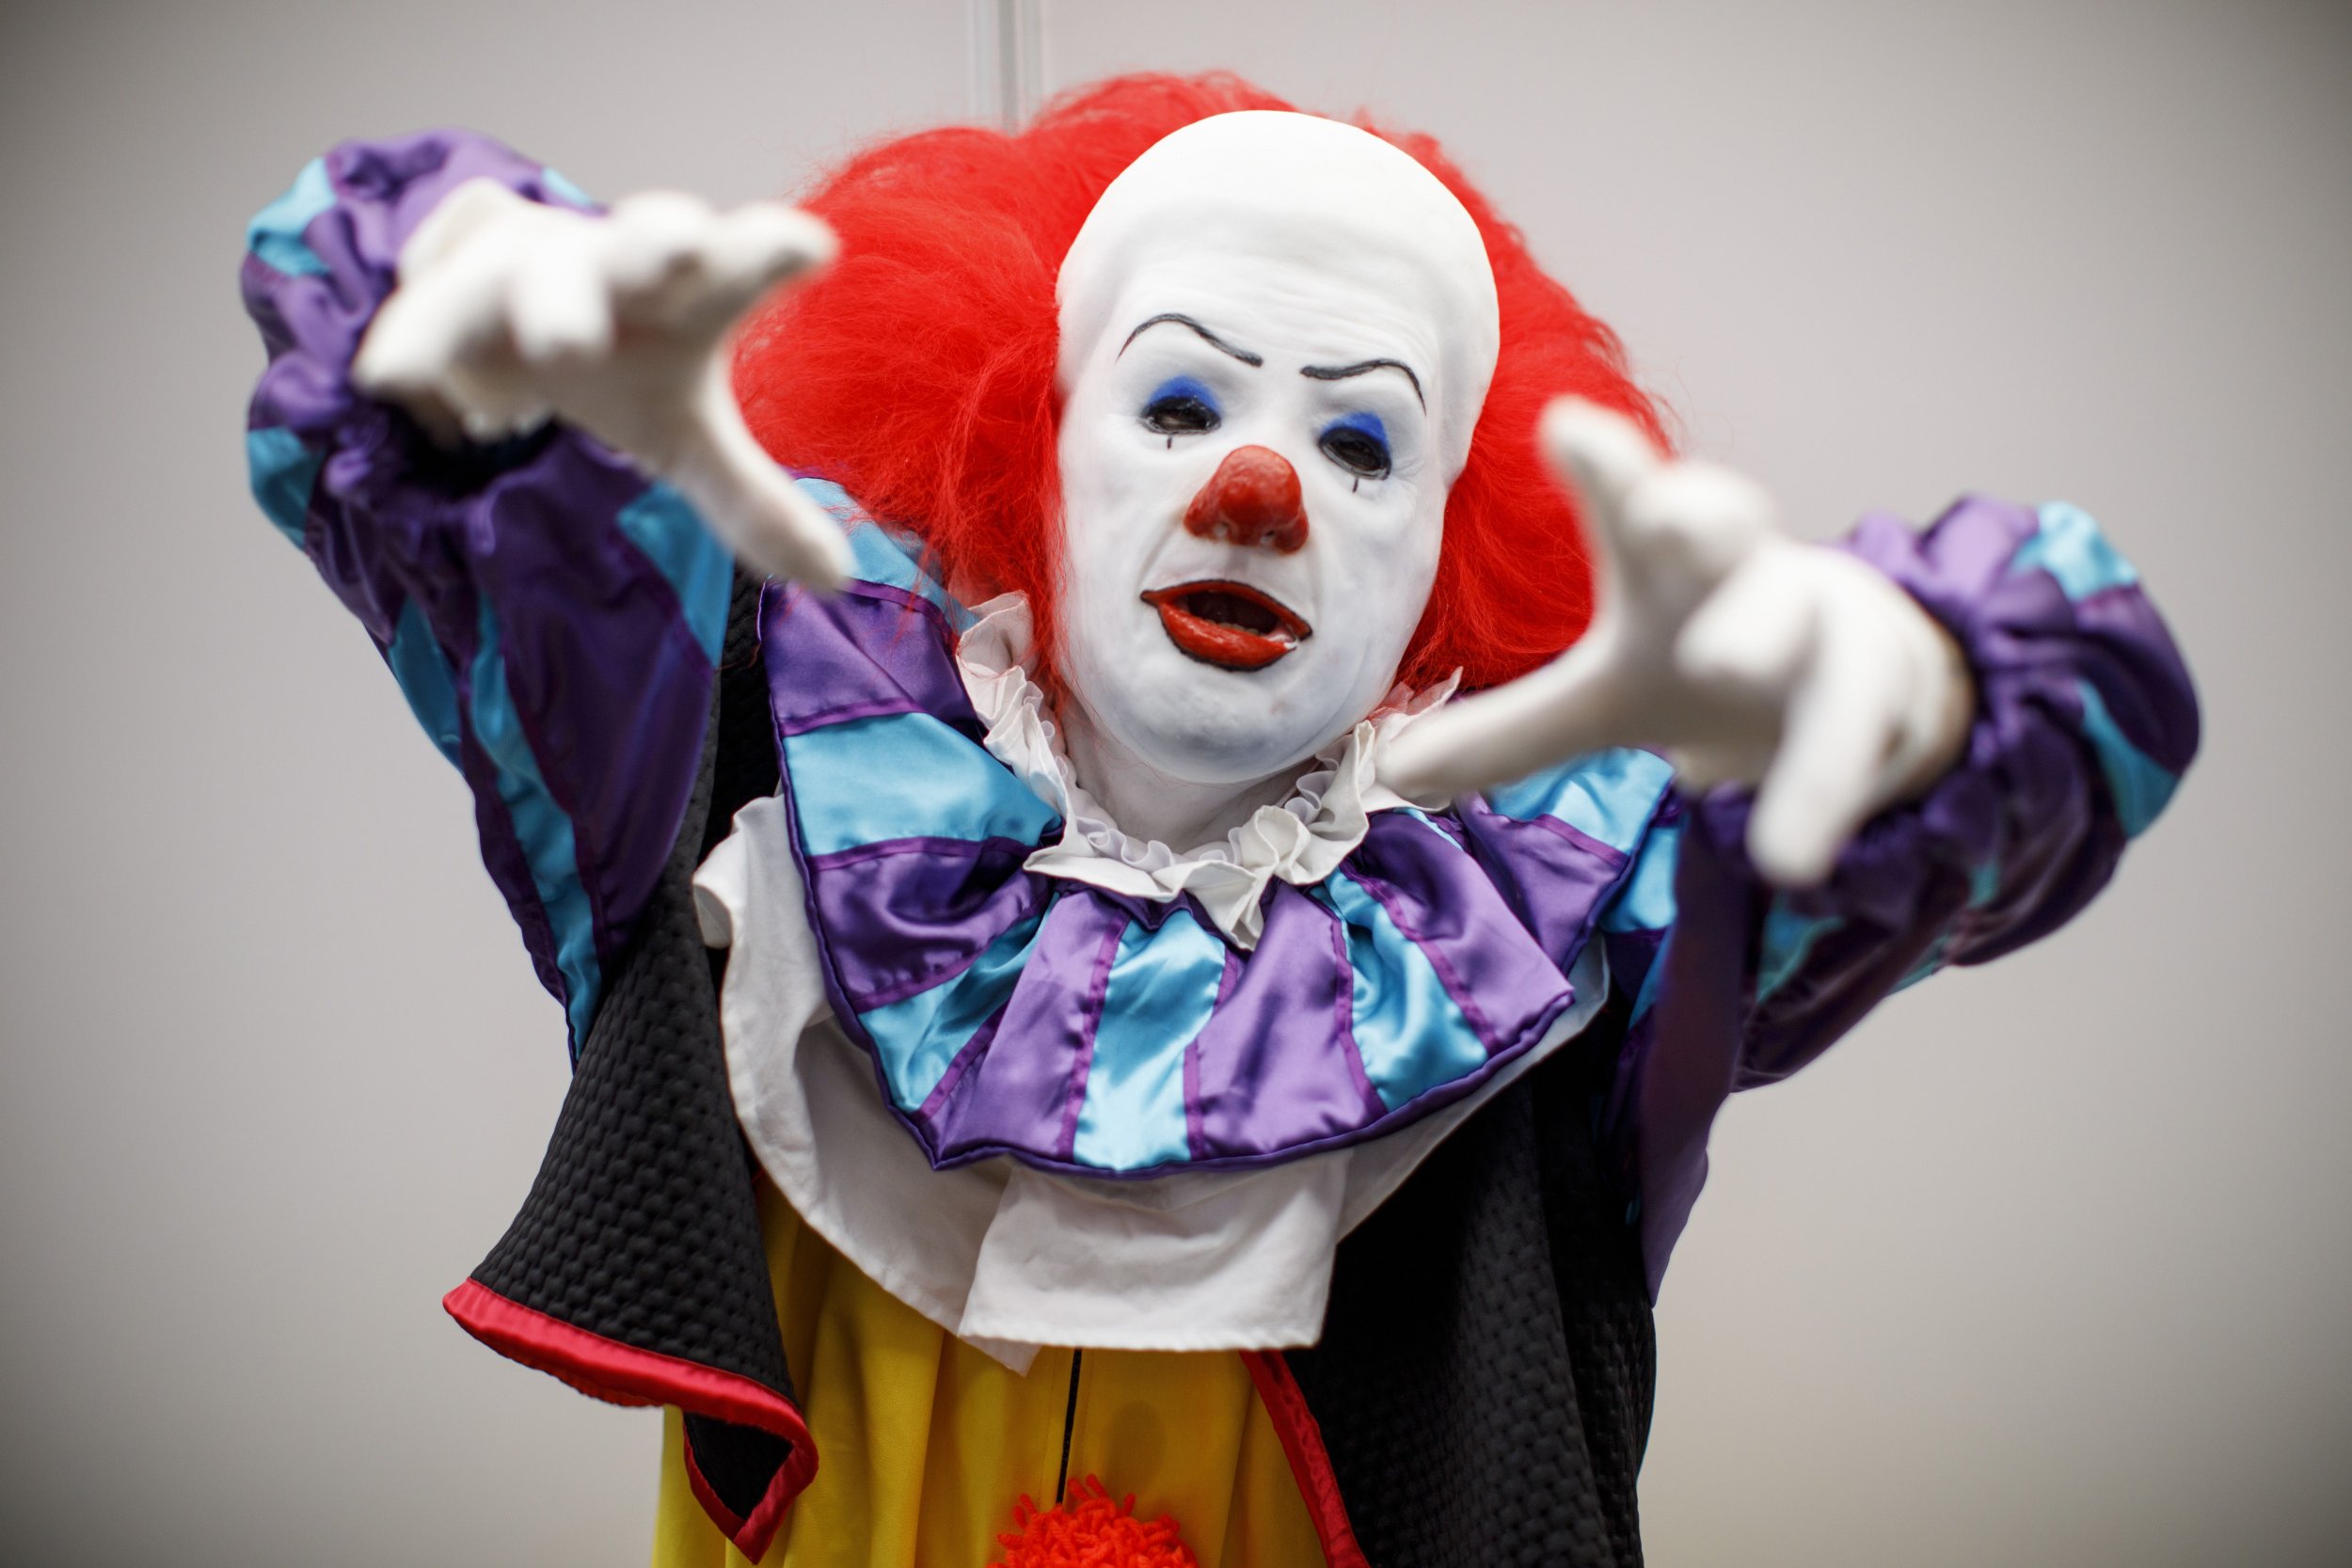 The History and Psychology of Clowns Being Scary